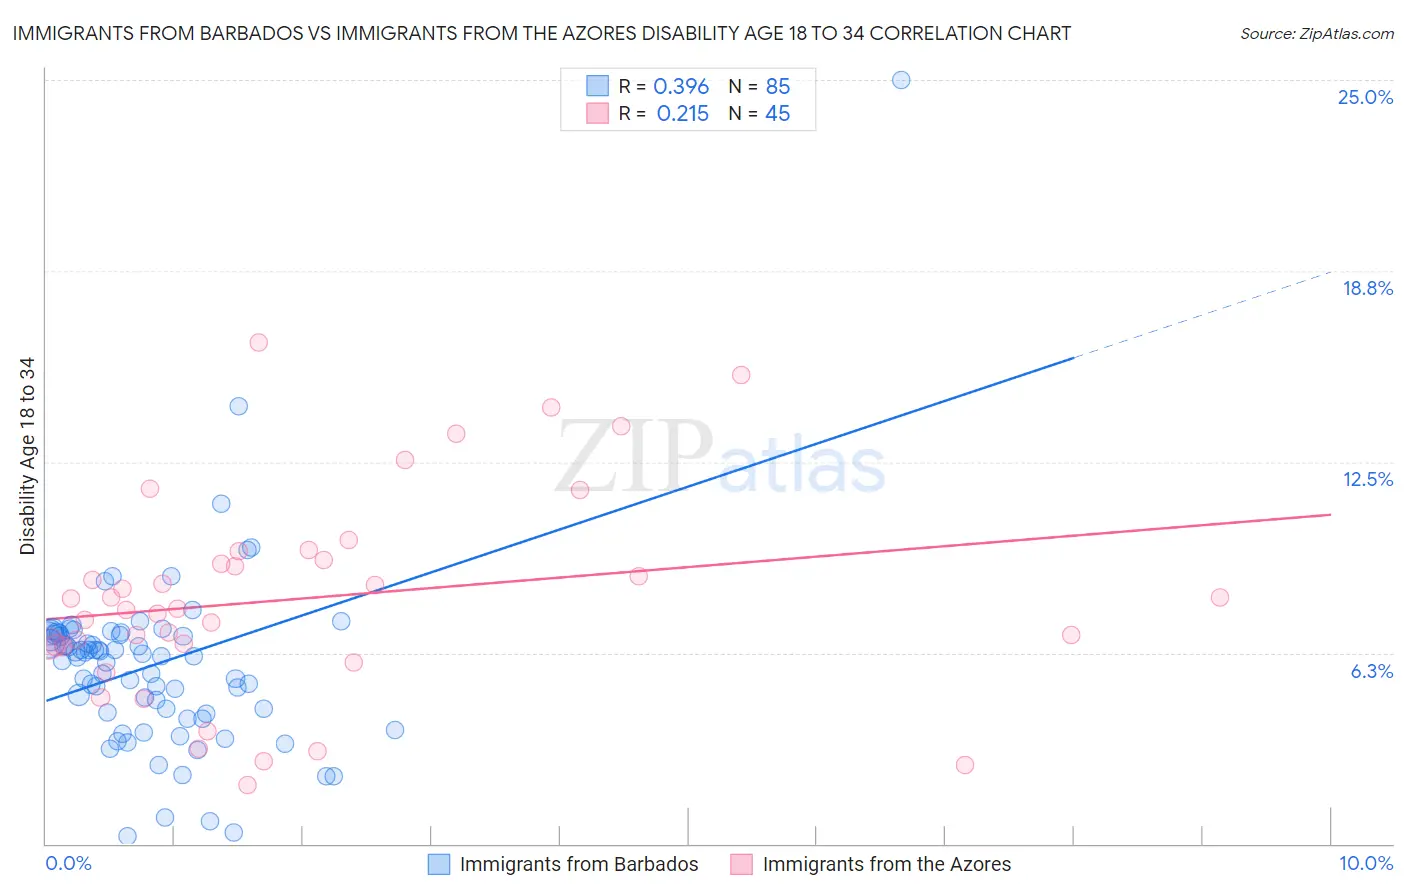 Immigrants from Barbados vs Immigrants from the Azores Disability Age 18 to 34